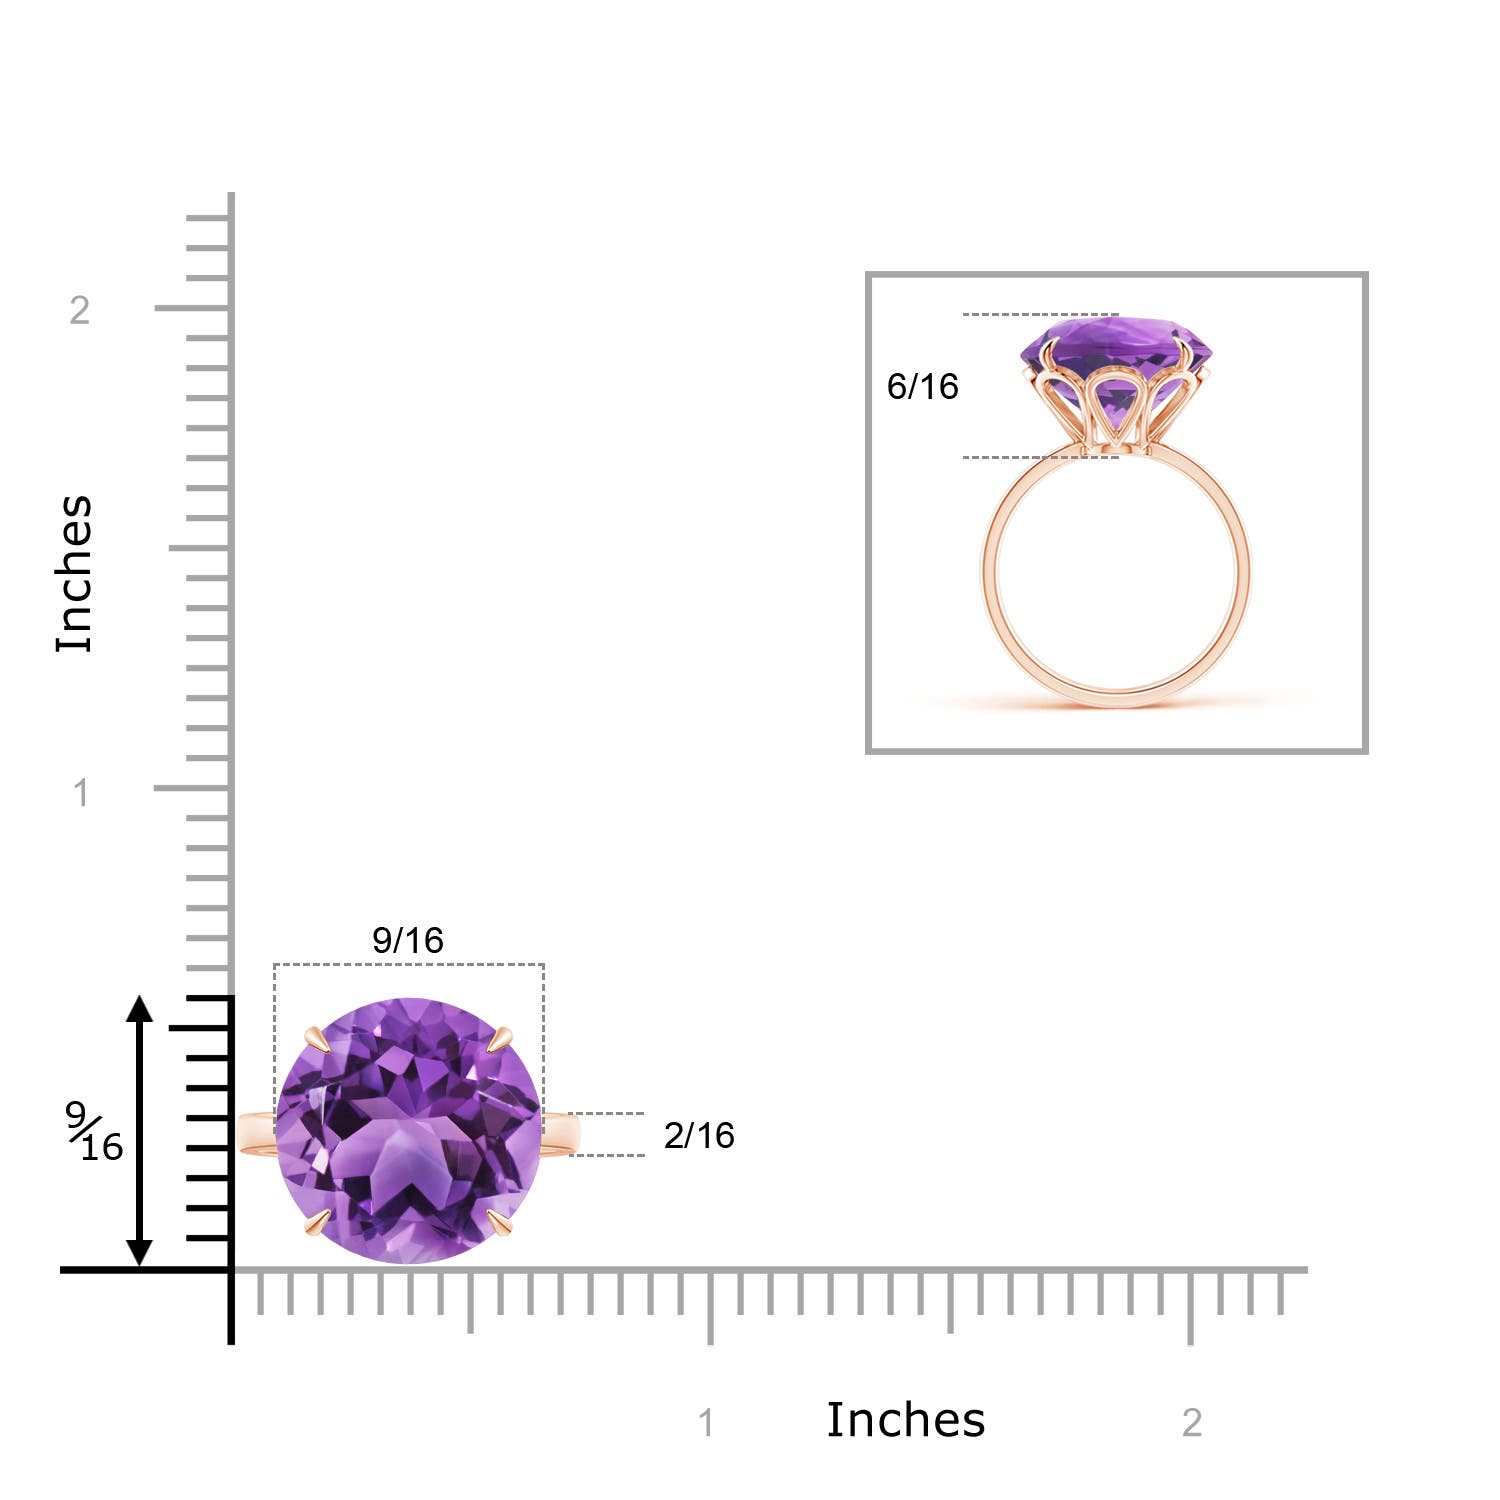 AA - Amethyst / 8.5 CT / 14 KT Rose Gold